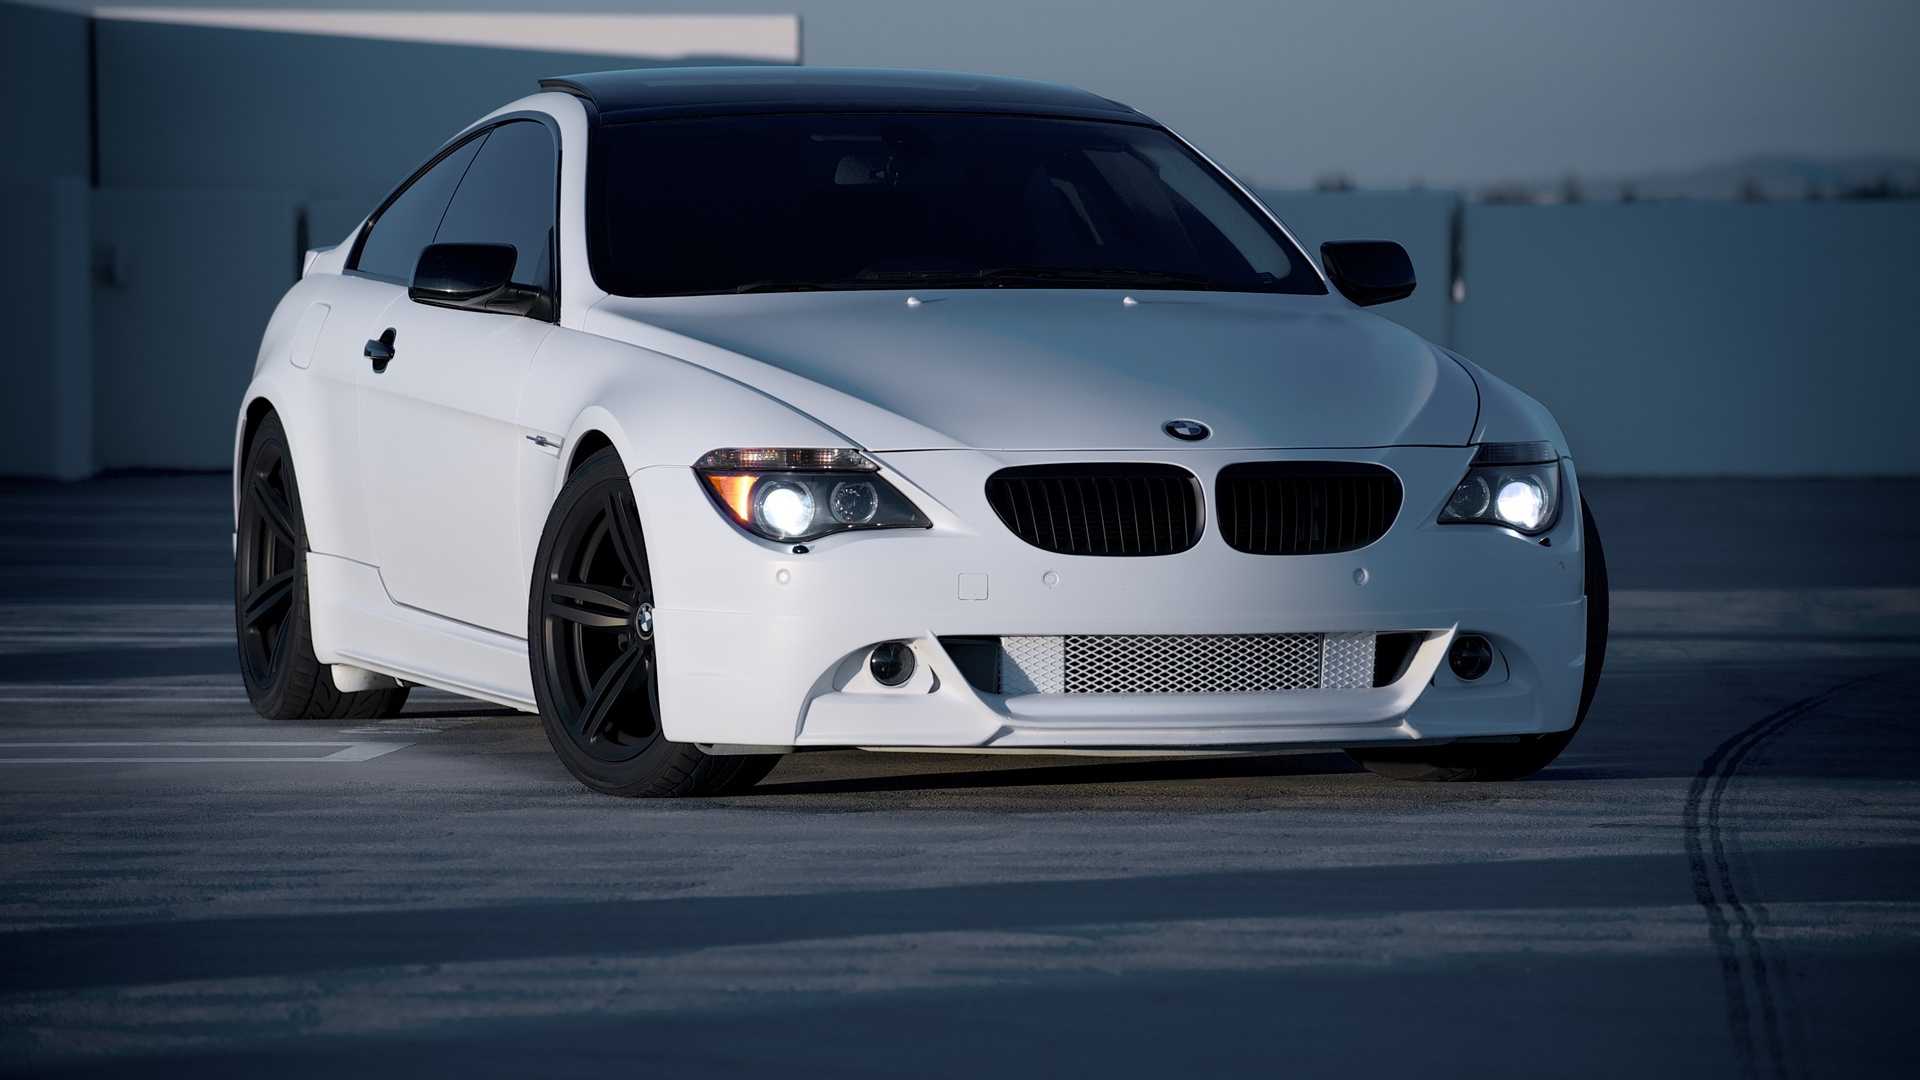 bmw, e63, bmw, white, roof, white, parking, m6, front